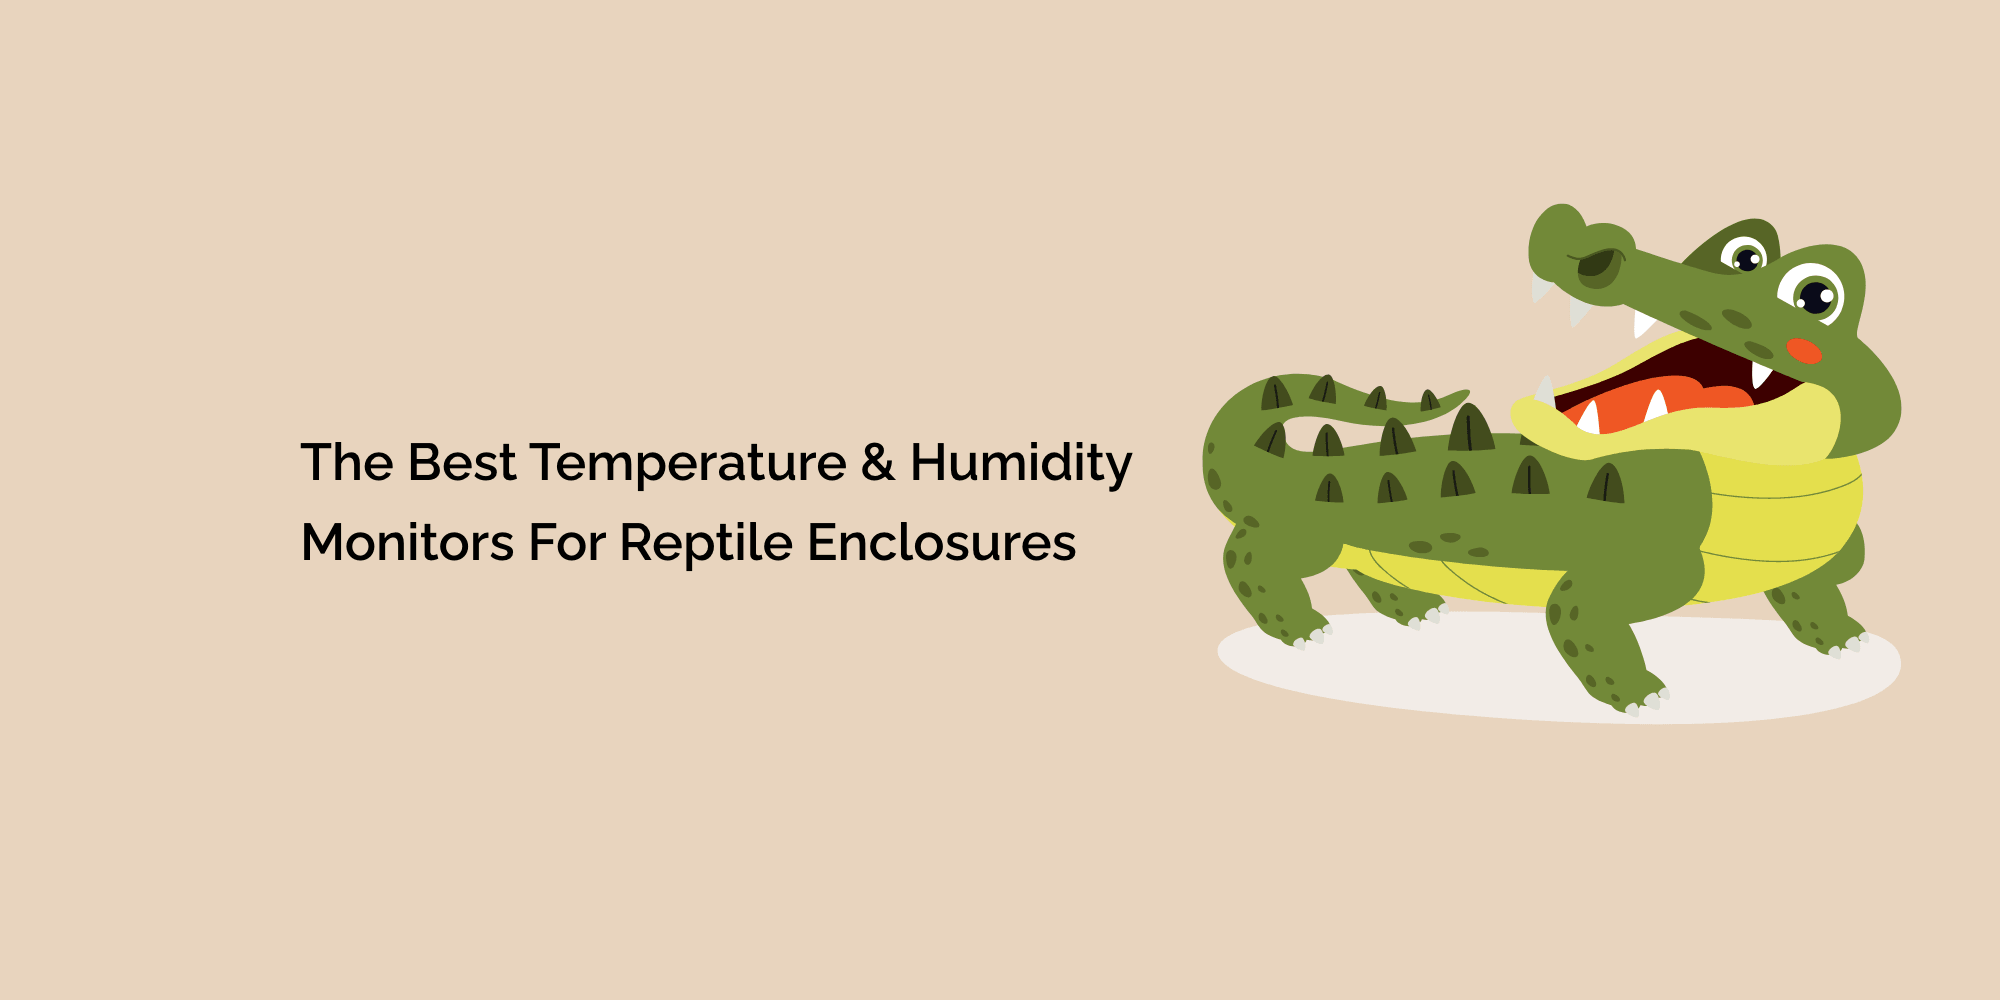 The Best Temperature and Humidity Monitors for Reptile Enclosures